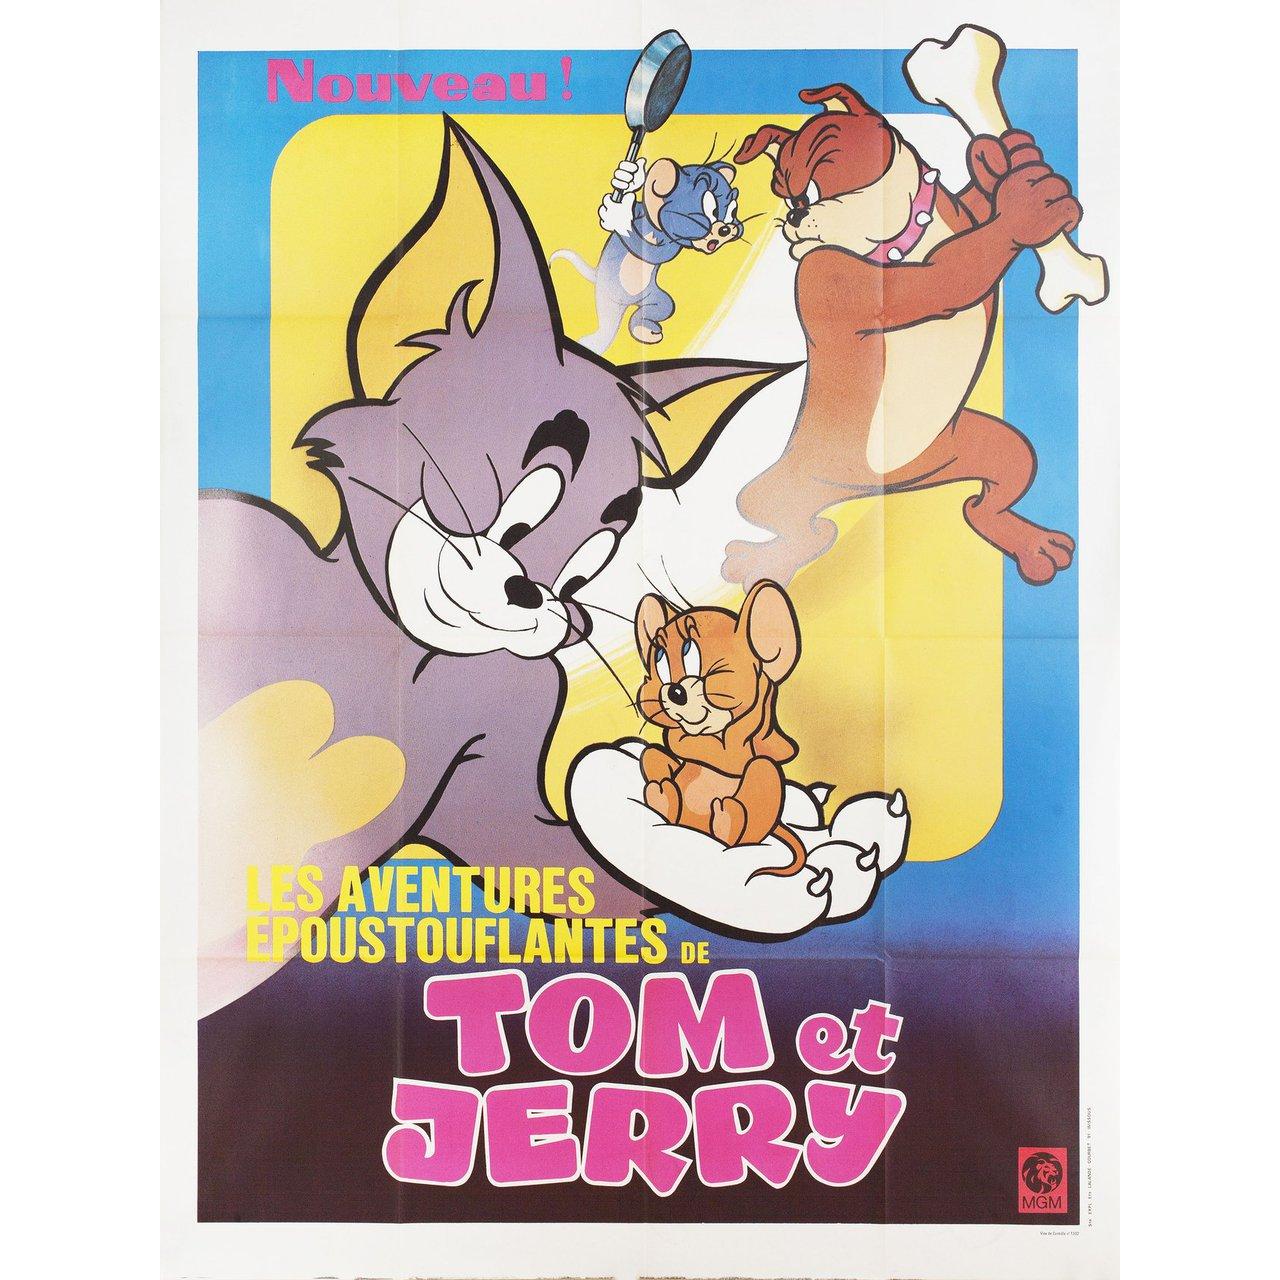 Original 1974 French Grande poster for the 1940s film Tom and Jerry. Fine condition, folded. Many original posters were issued folded or were subsequently folded. Please note: the size is stated in inches and the actual size can vary by an inch or